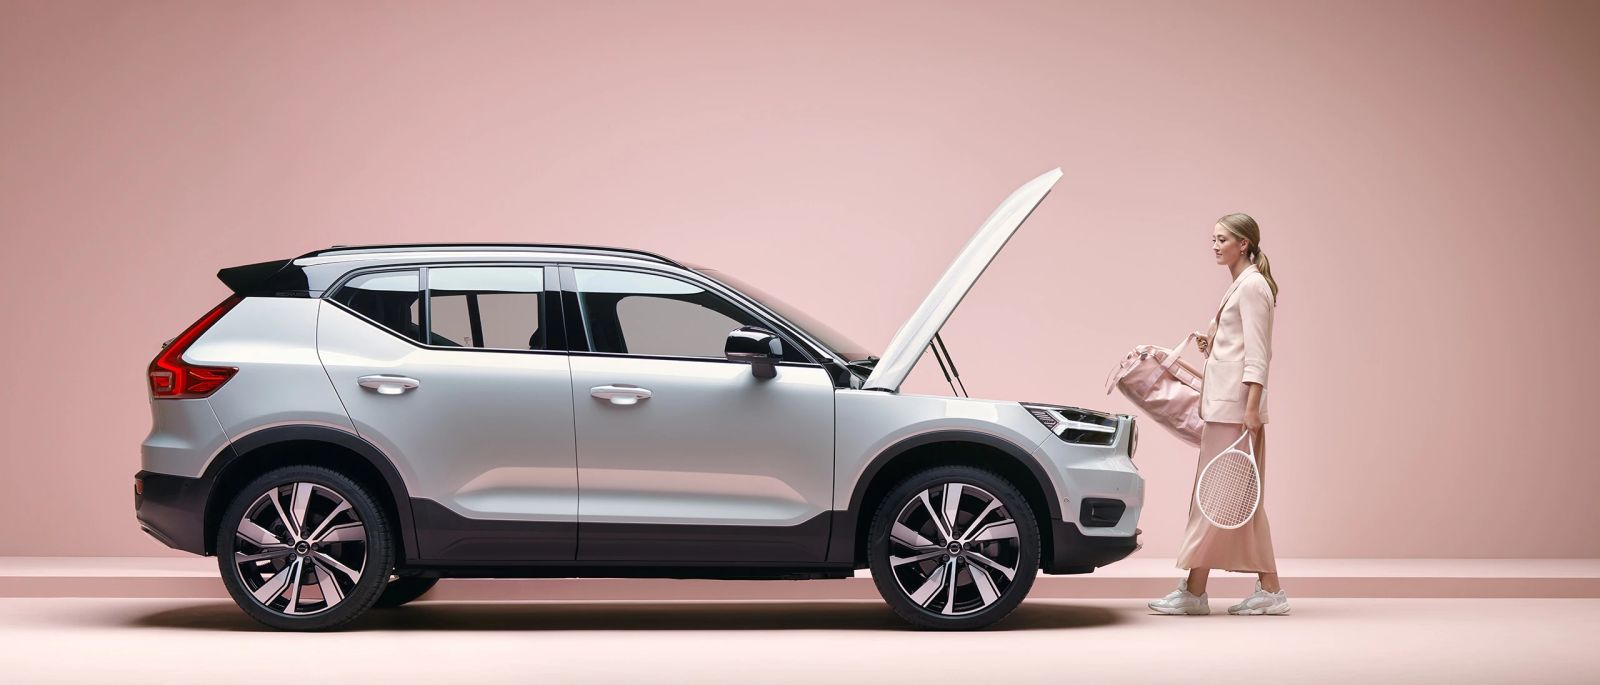 Illustration for article titled EPA range ratings for the Polestar 2  Volvo XC40 Recharge are in. They suck.